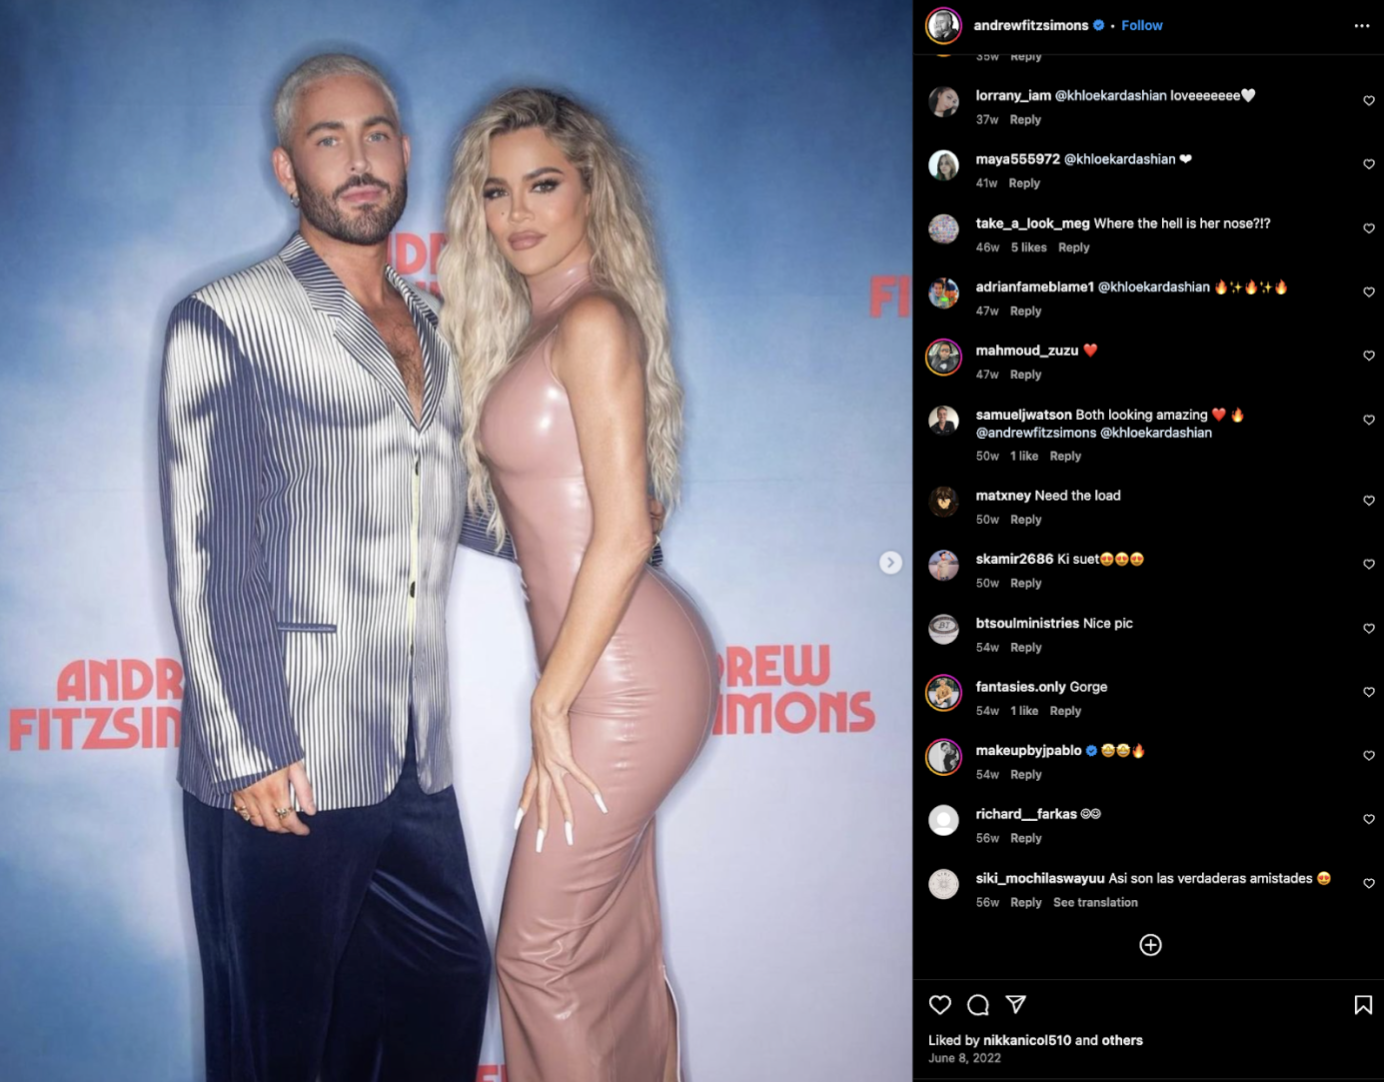 Instagram photo of Andrew Fitzsimmon and Khloe Kardashian posing together on a red carpet